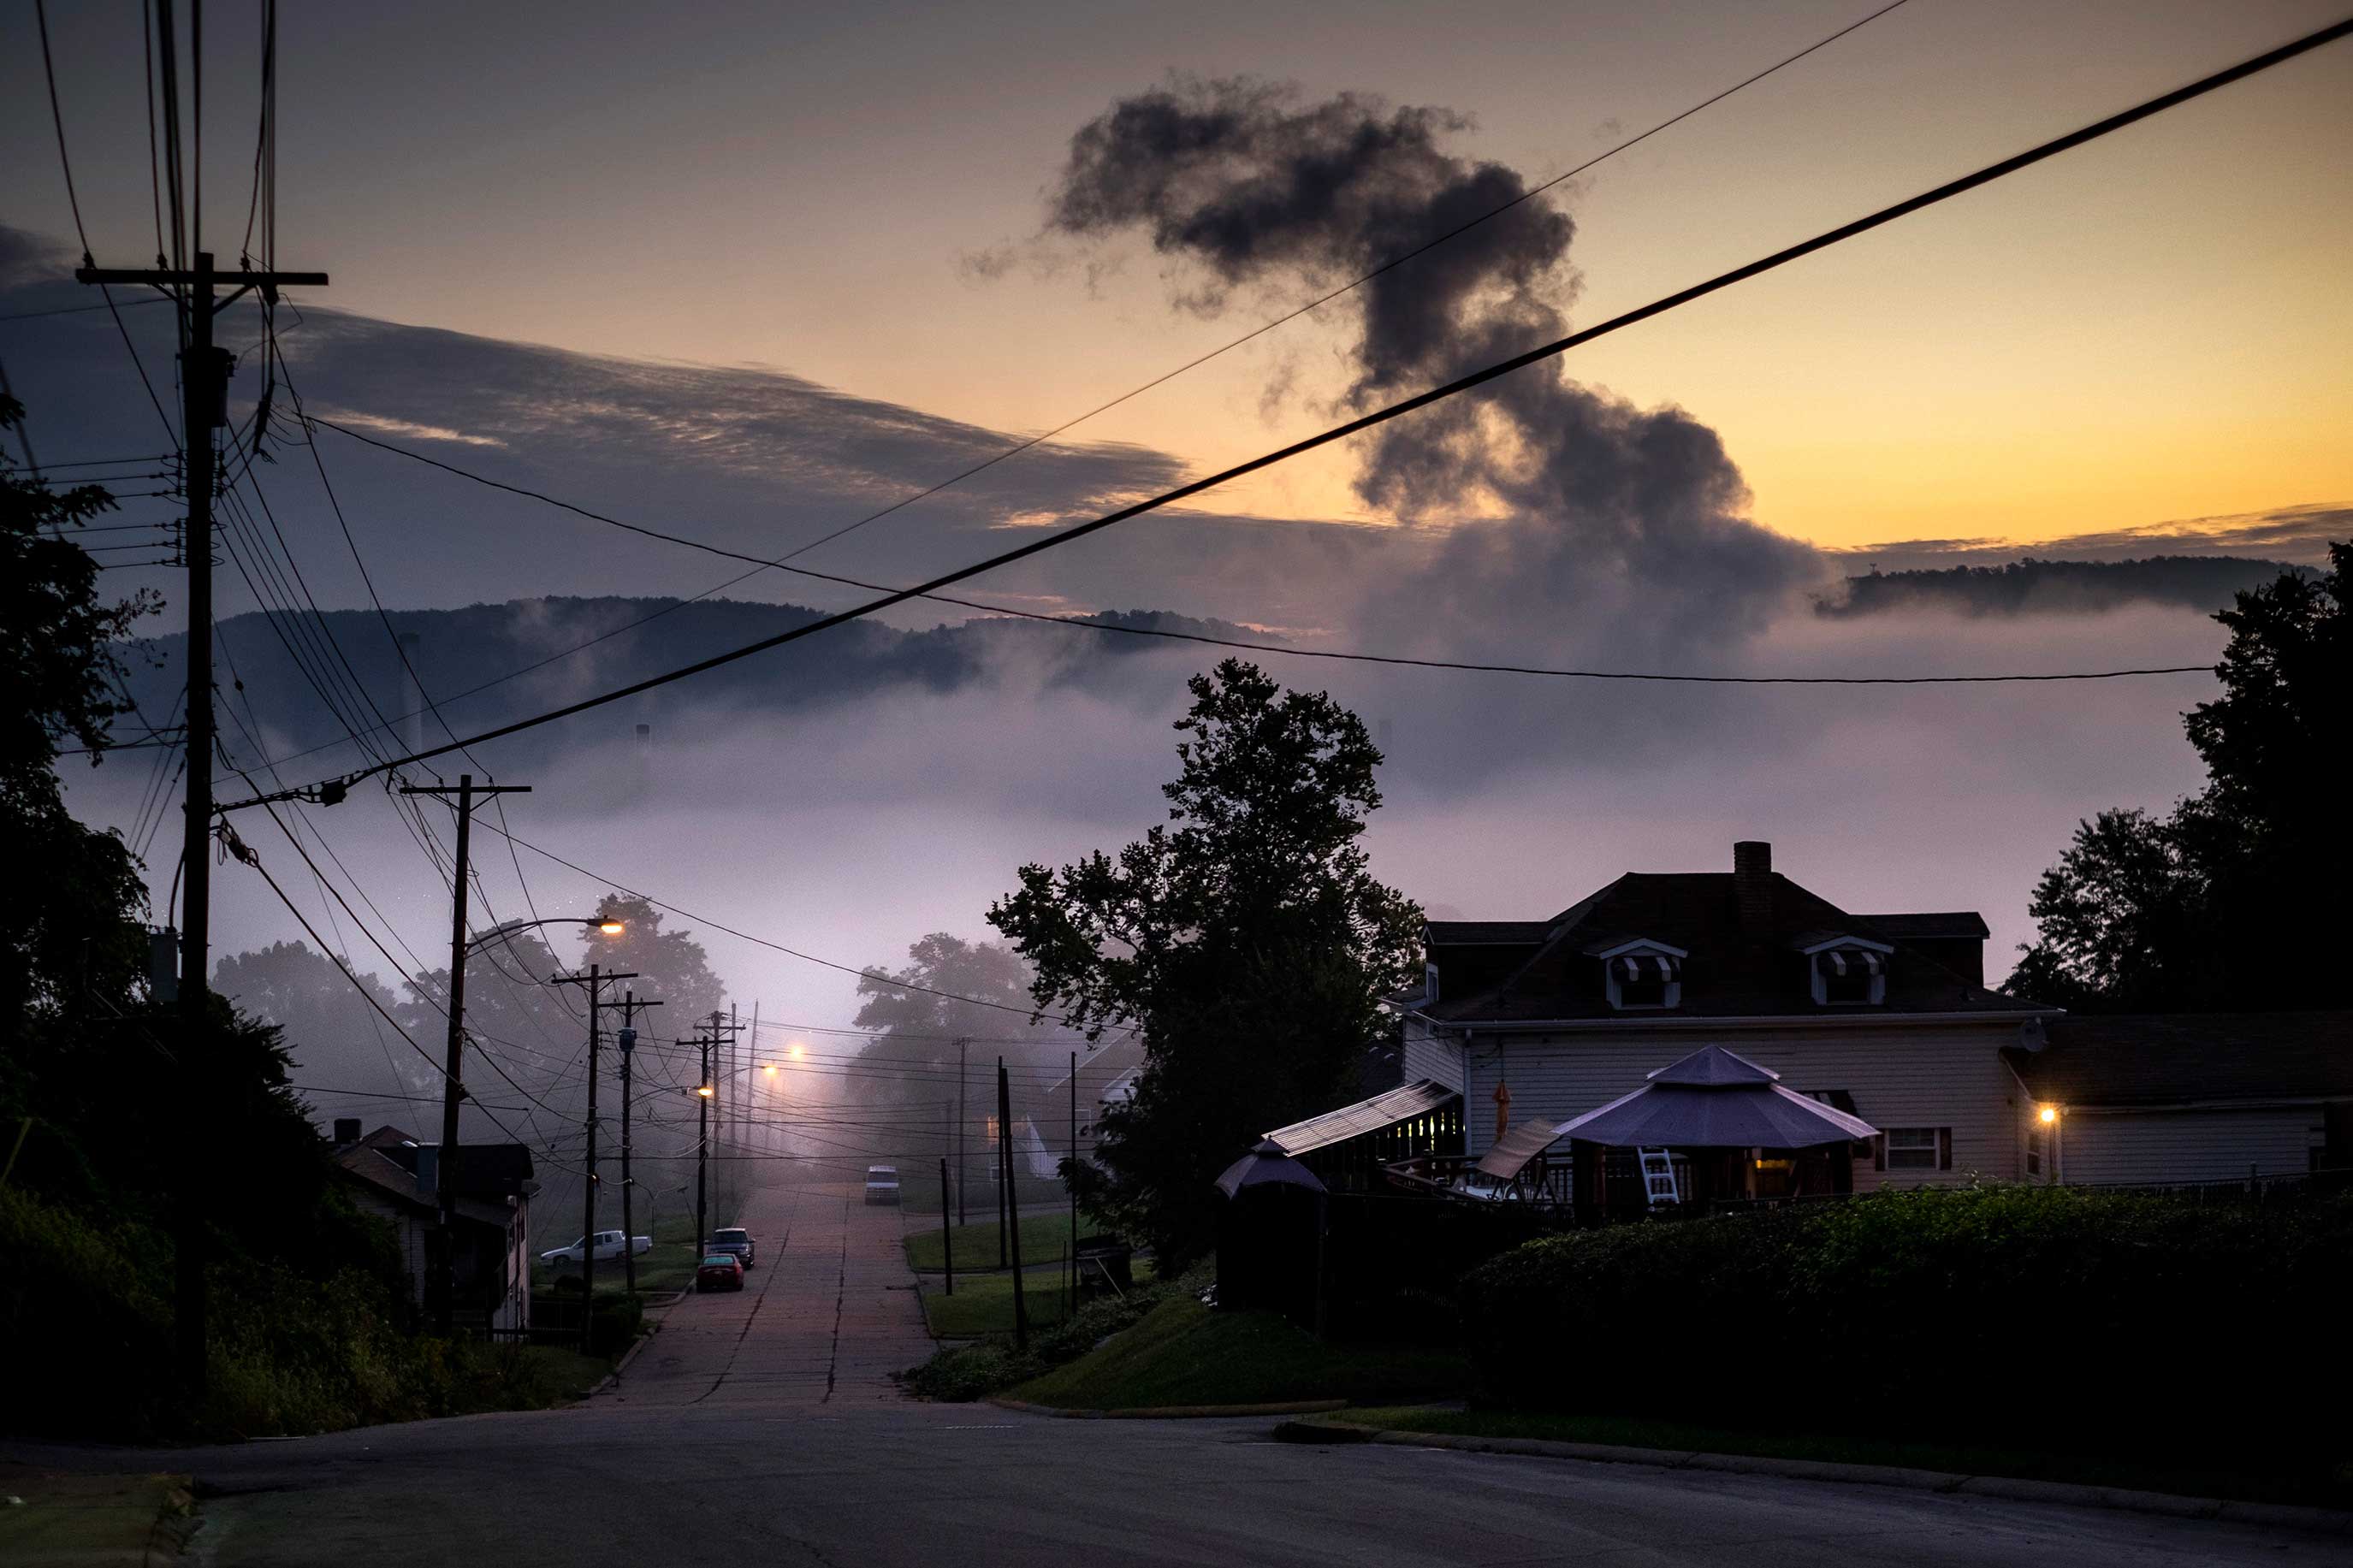 A temperature inversion hold down the smog and pollution from the US Steel Clairton Coke Works in Clairton, PA.